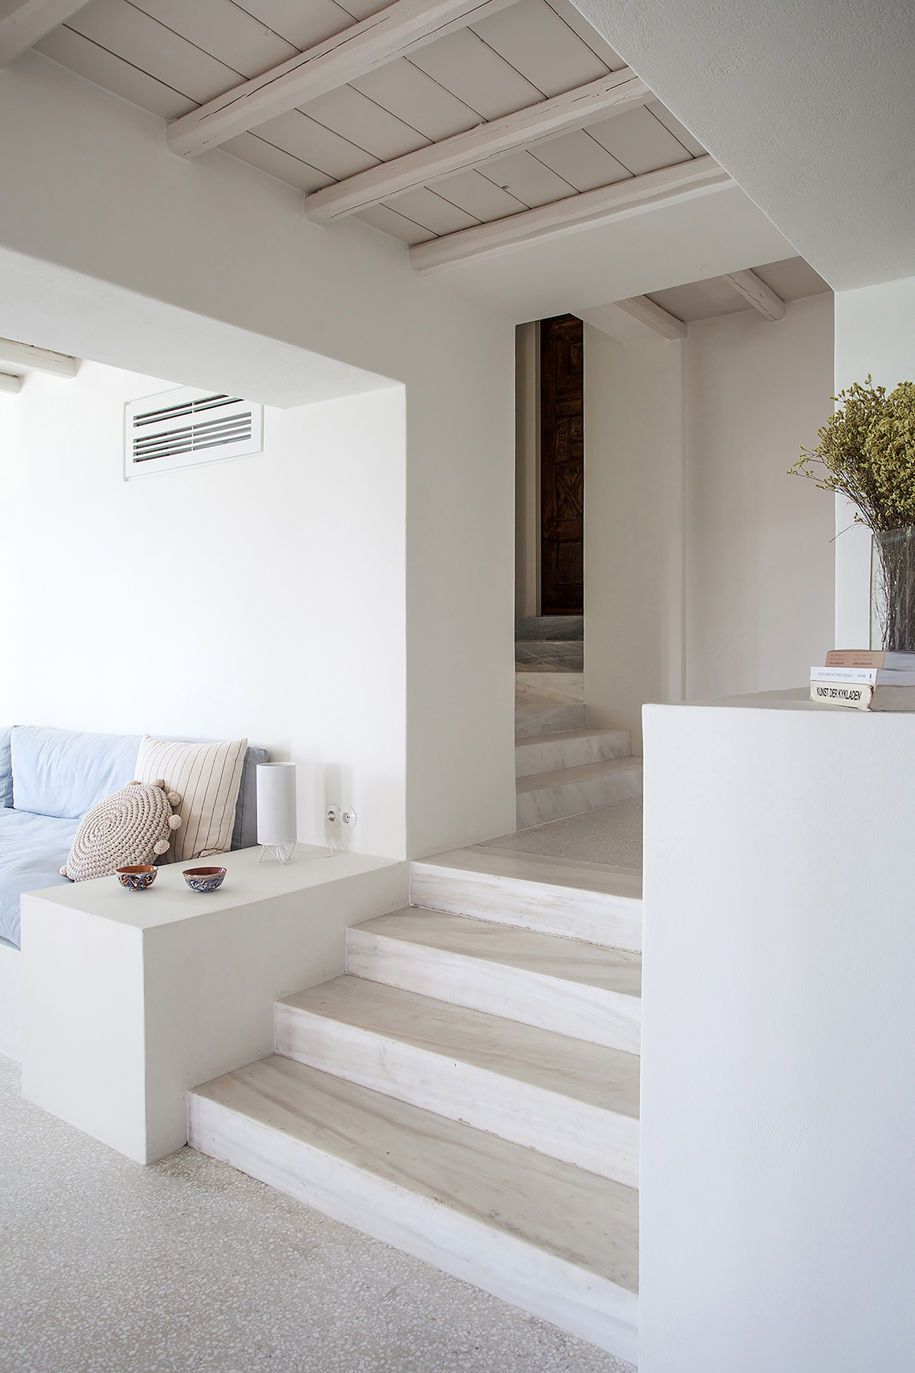 Archisearch ARP Architecture Research Practice renovated a 30-year-old summer house in Mykonos island